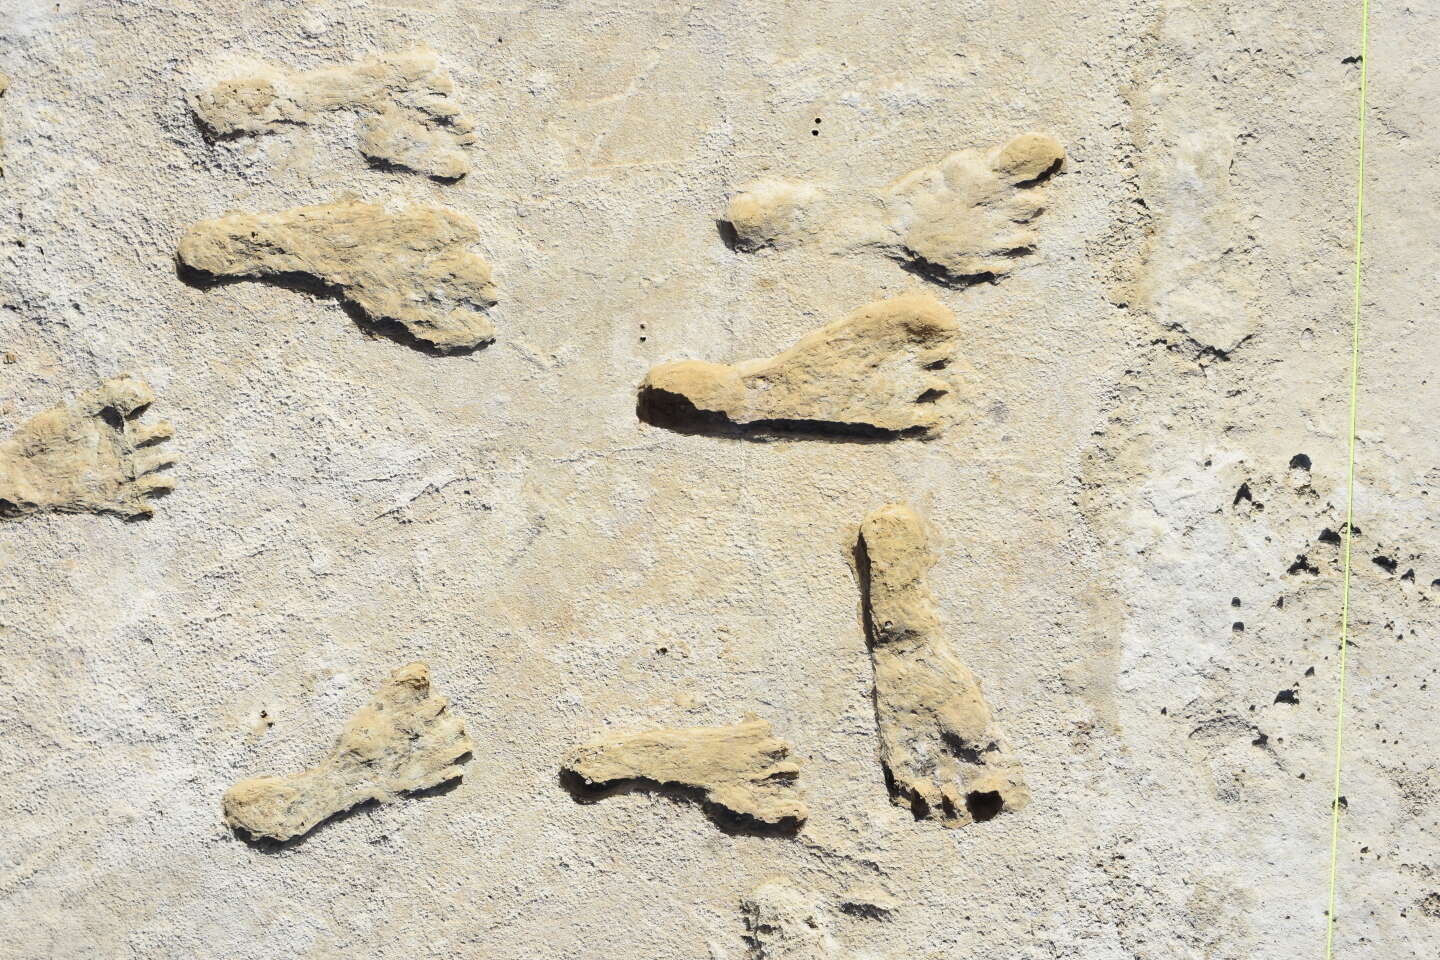 Date confirmation of 23,000-year-old footprints in the United States